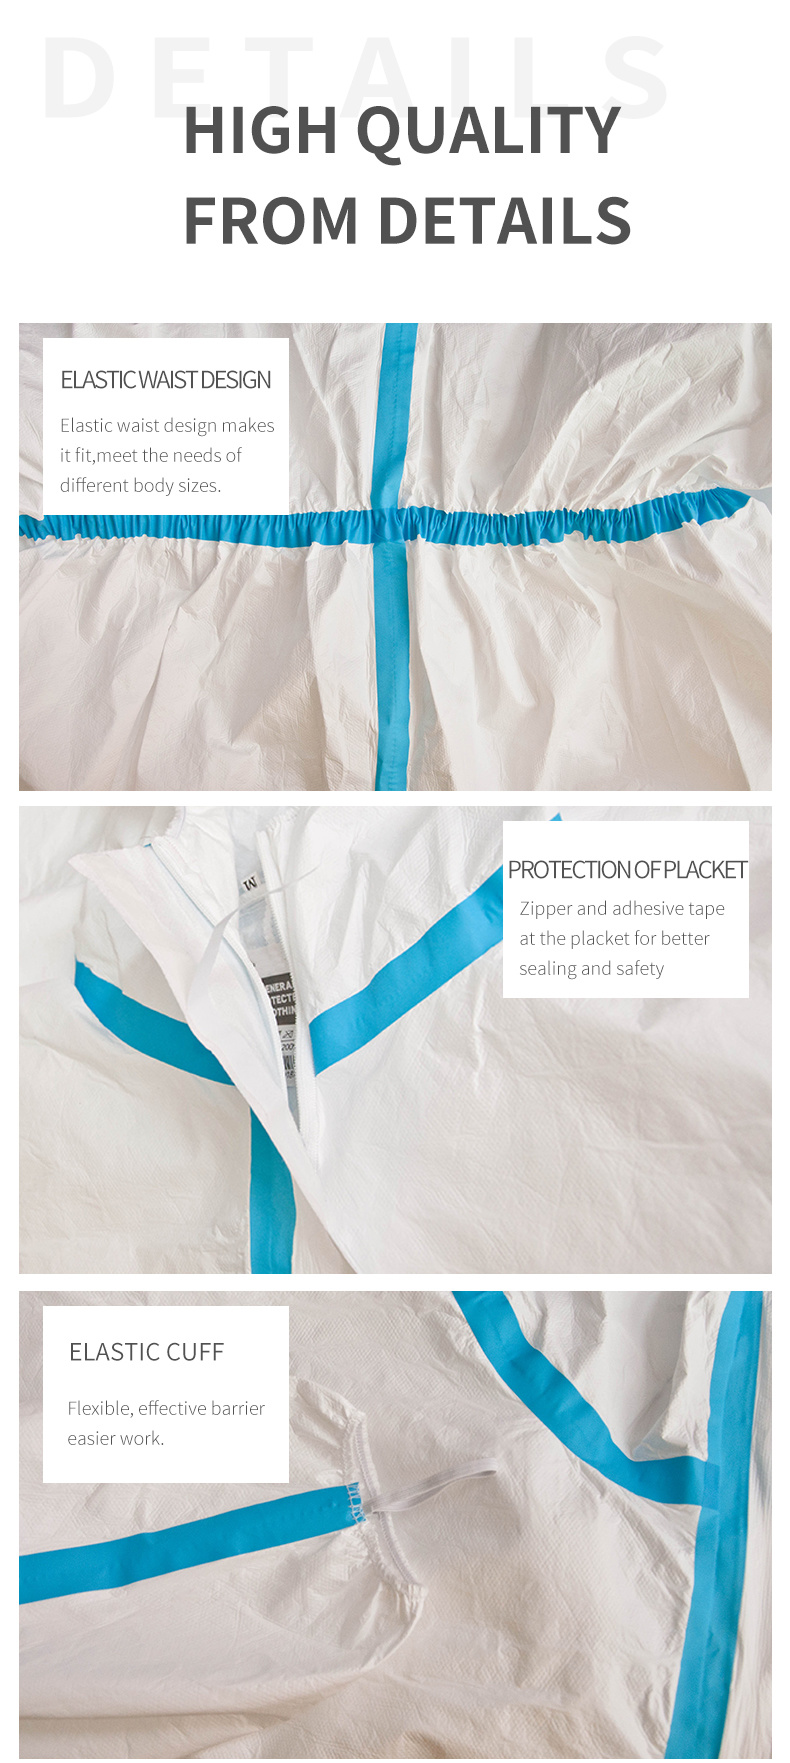 Protective Disposable Protective and Safety Equipment Suit/Clothing